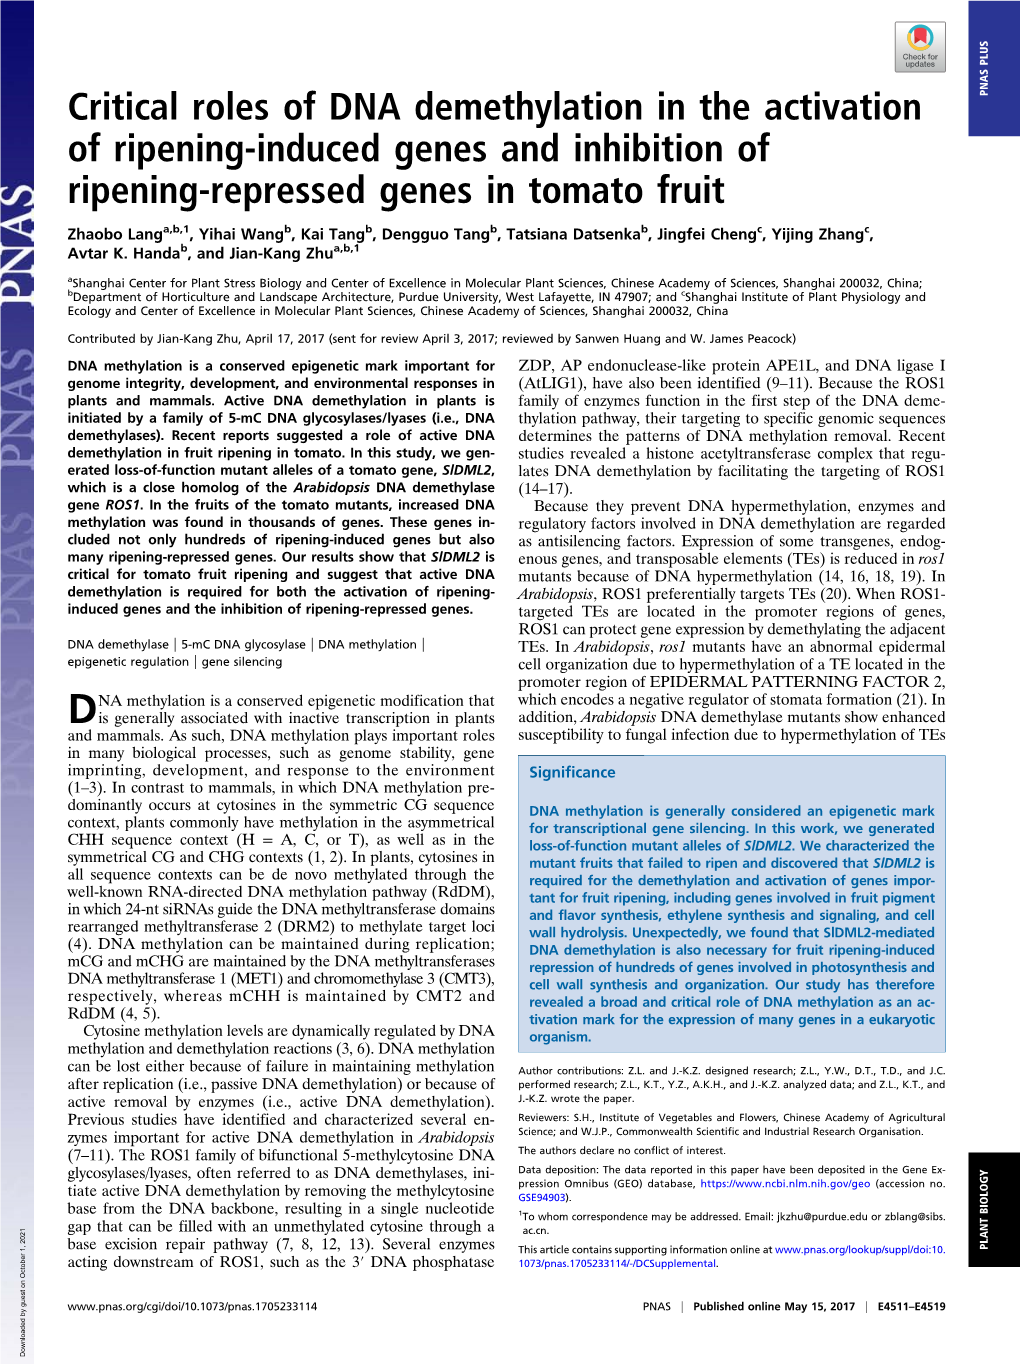 Critical Roles of DNA Demethylation in the Activation of Ripening-Induced